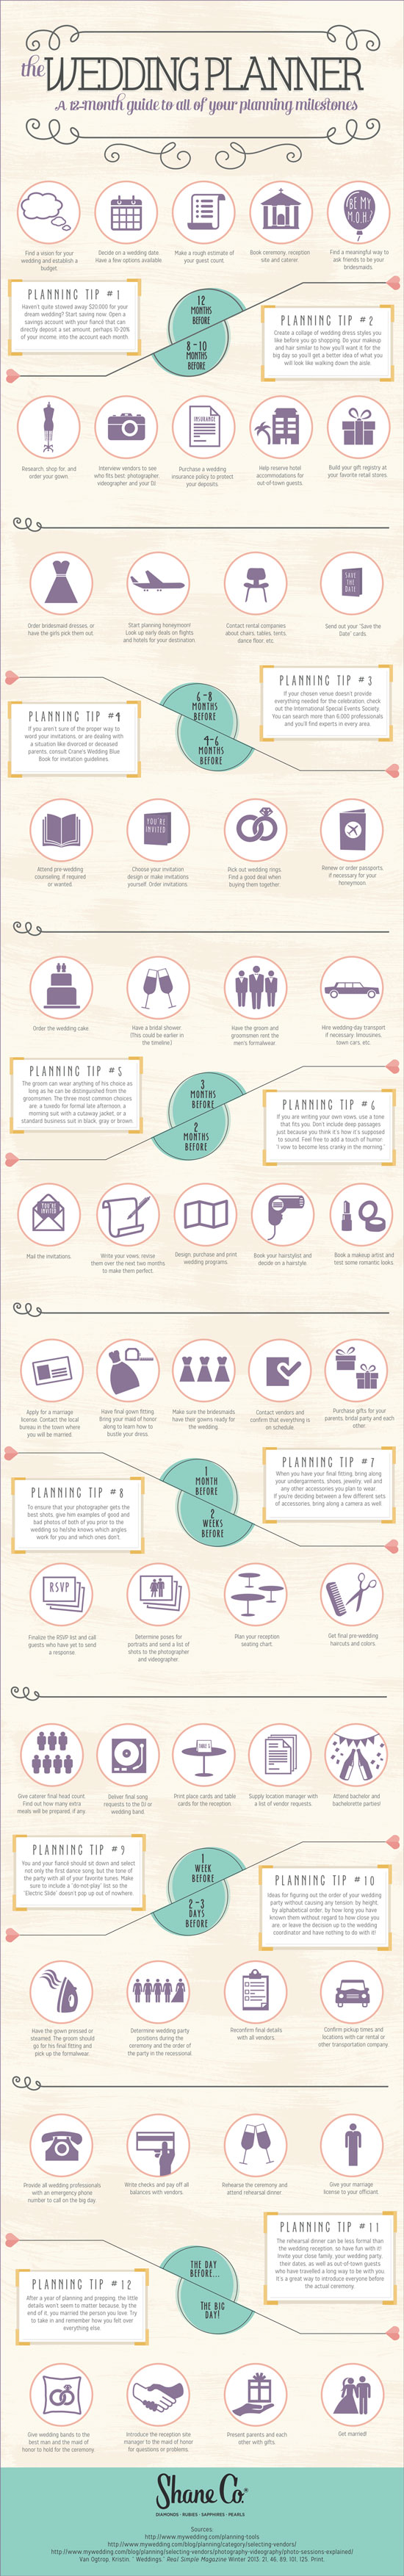 12 Month Wedding Engagement Plan Infographic by Shane Co.